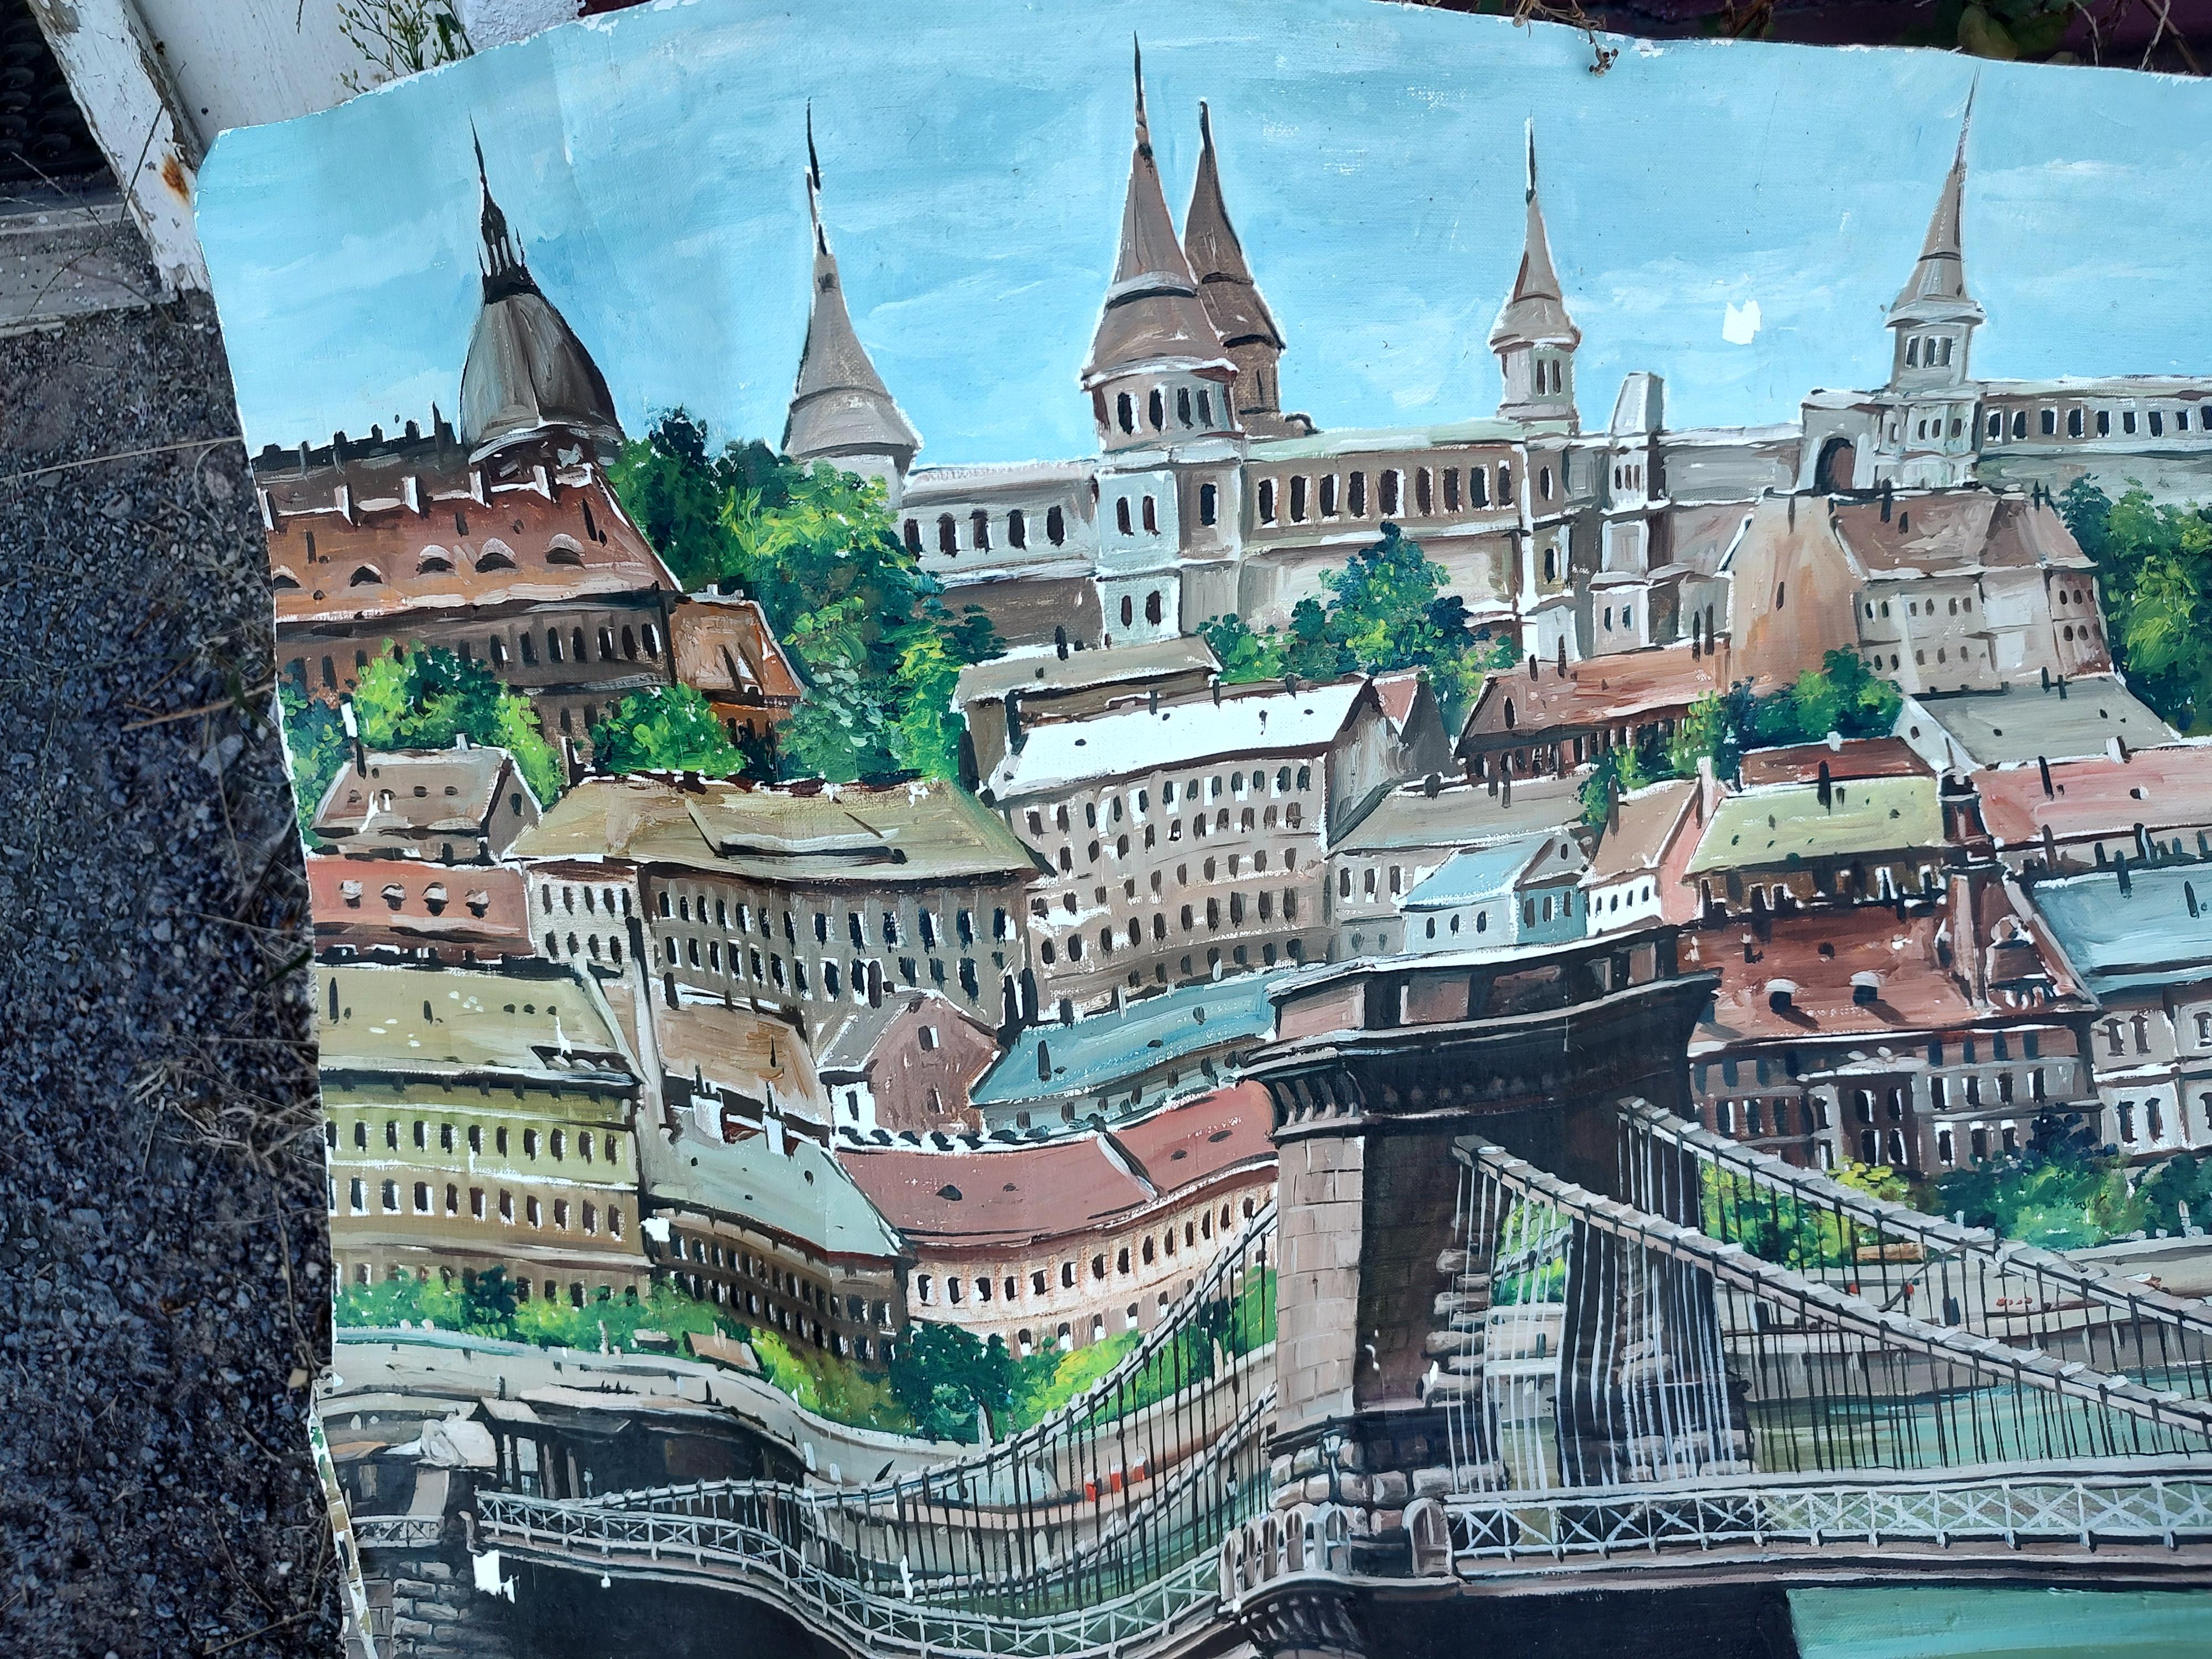 Fabulous large painting, wall mural of the Chain Bridge in Budapest Hungary. 10 feet x 4 feet with all the trimmings that surrounds the Danube River. Bridge was mostly destroyed by fleeing Germans during WW2 and it was rebuilt a few years later in